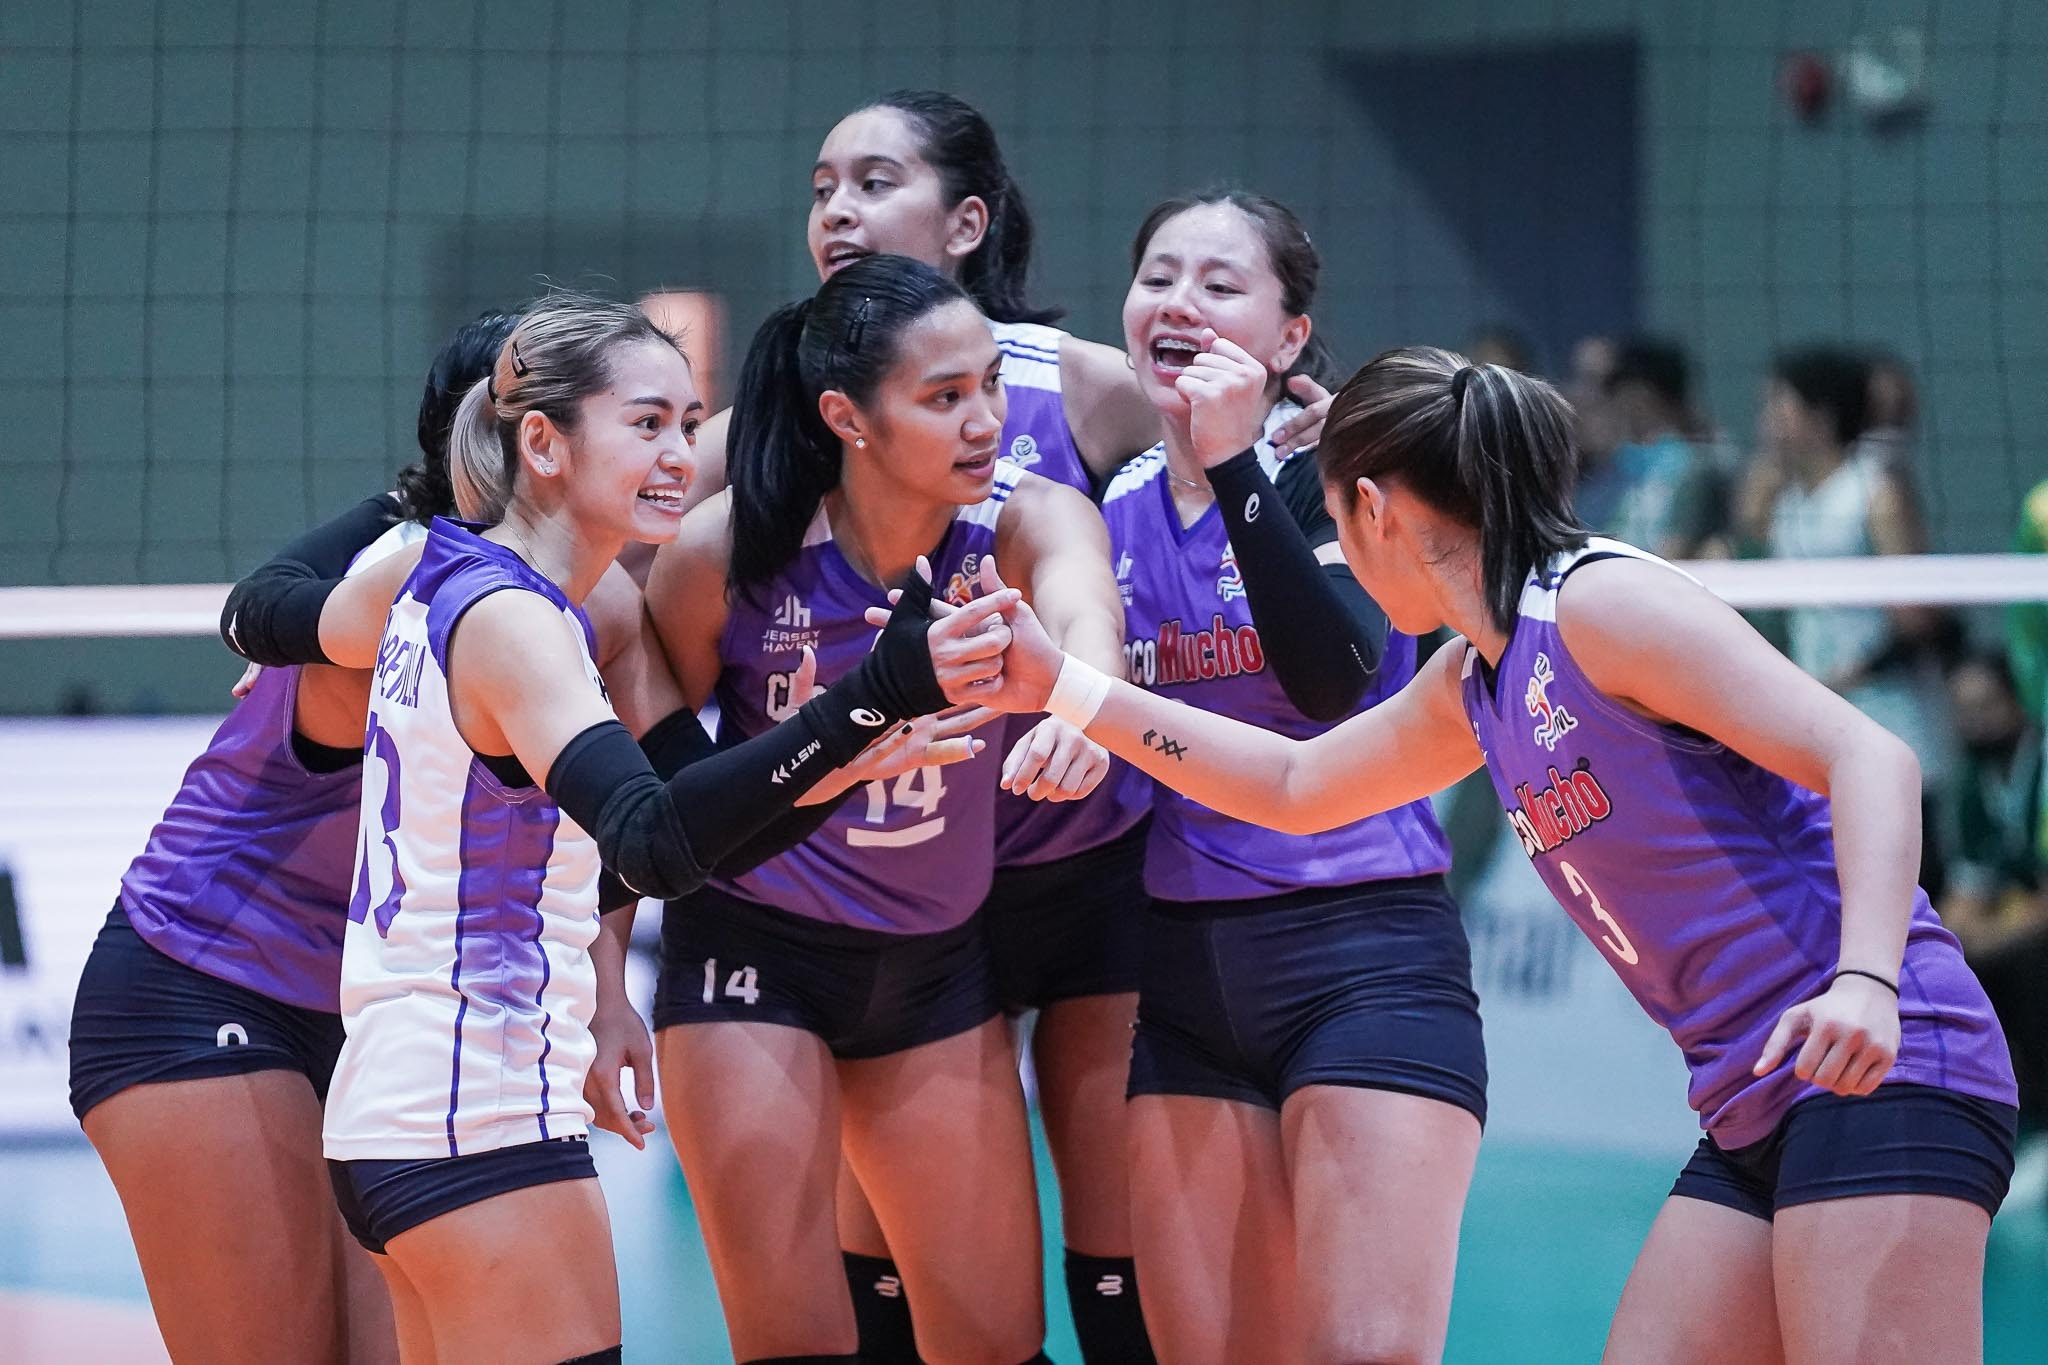 Reloaded Choco Mucho dominates in PVL conference debut over Army